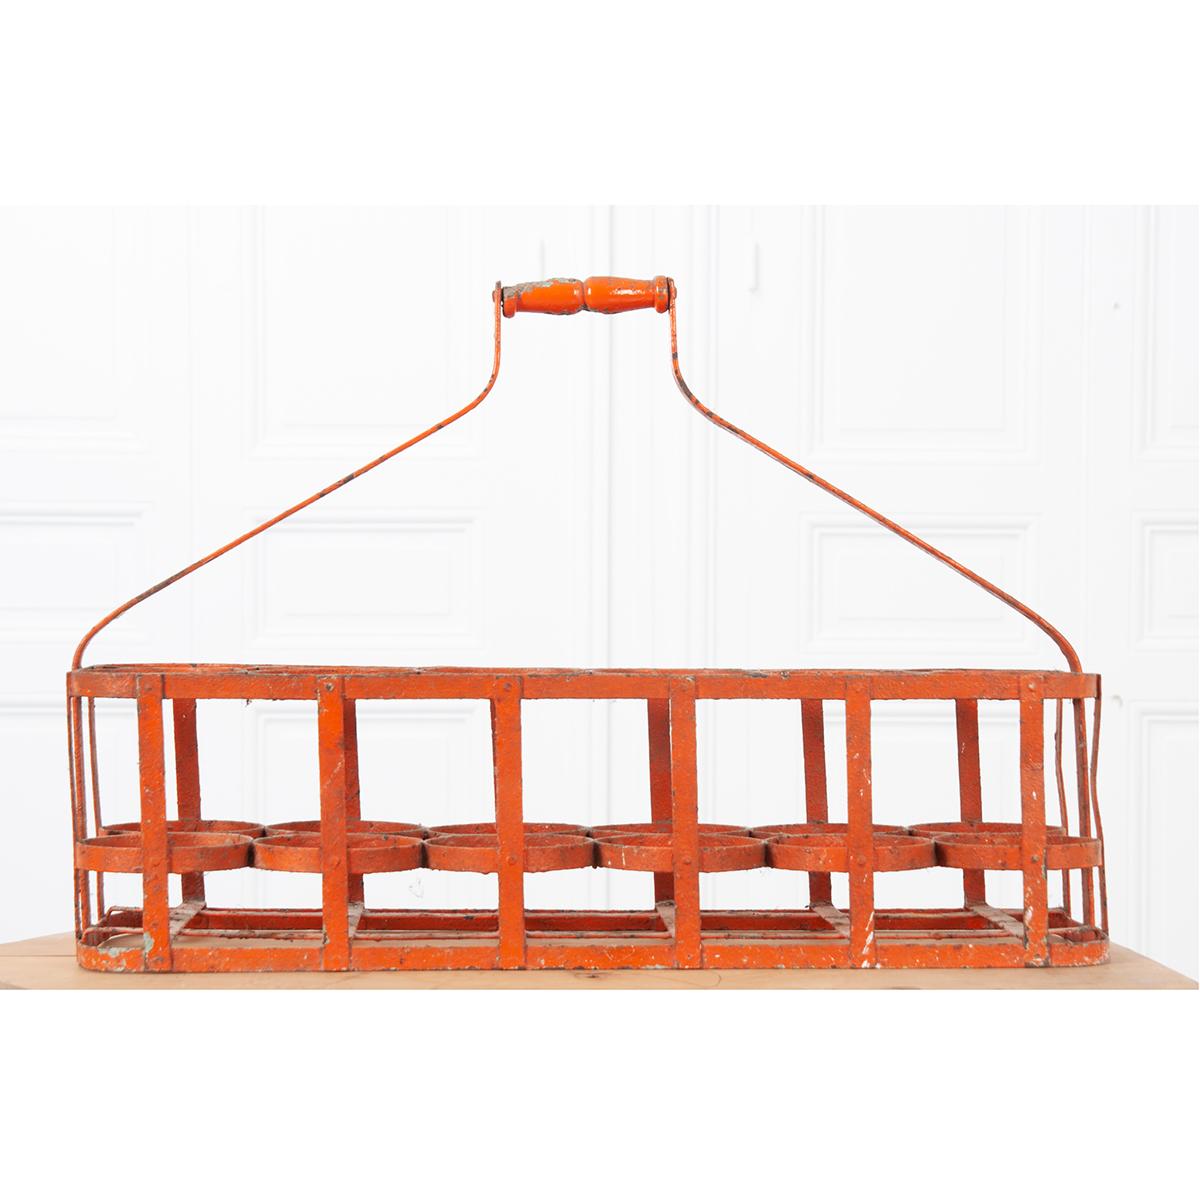 Other French Early 20th Century Bottle Carrier For Sale